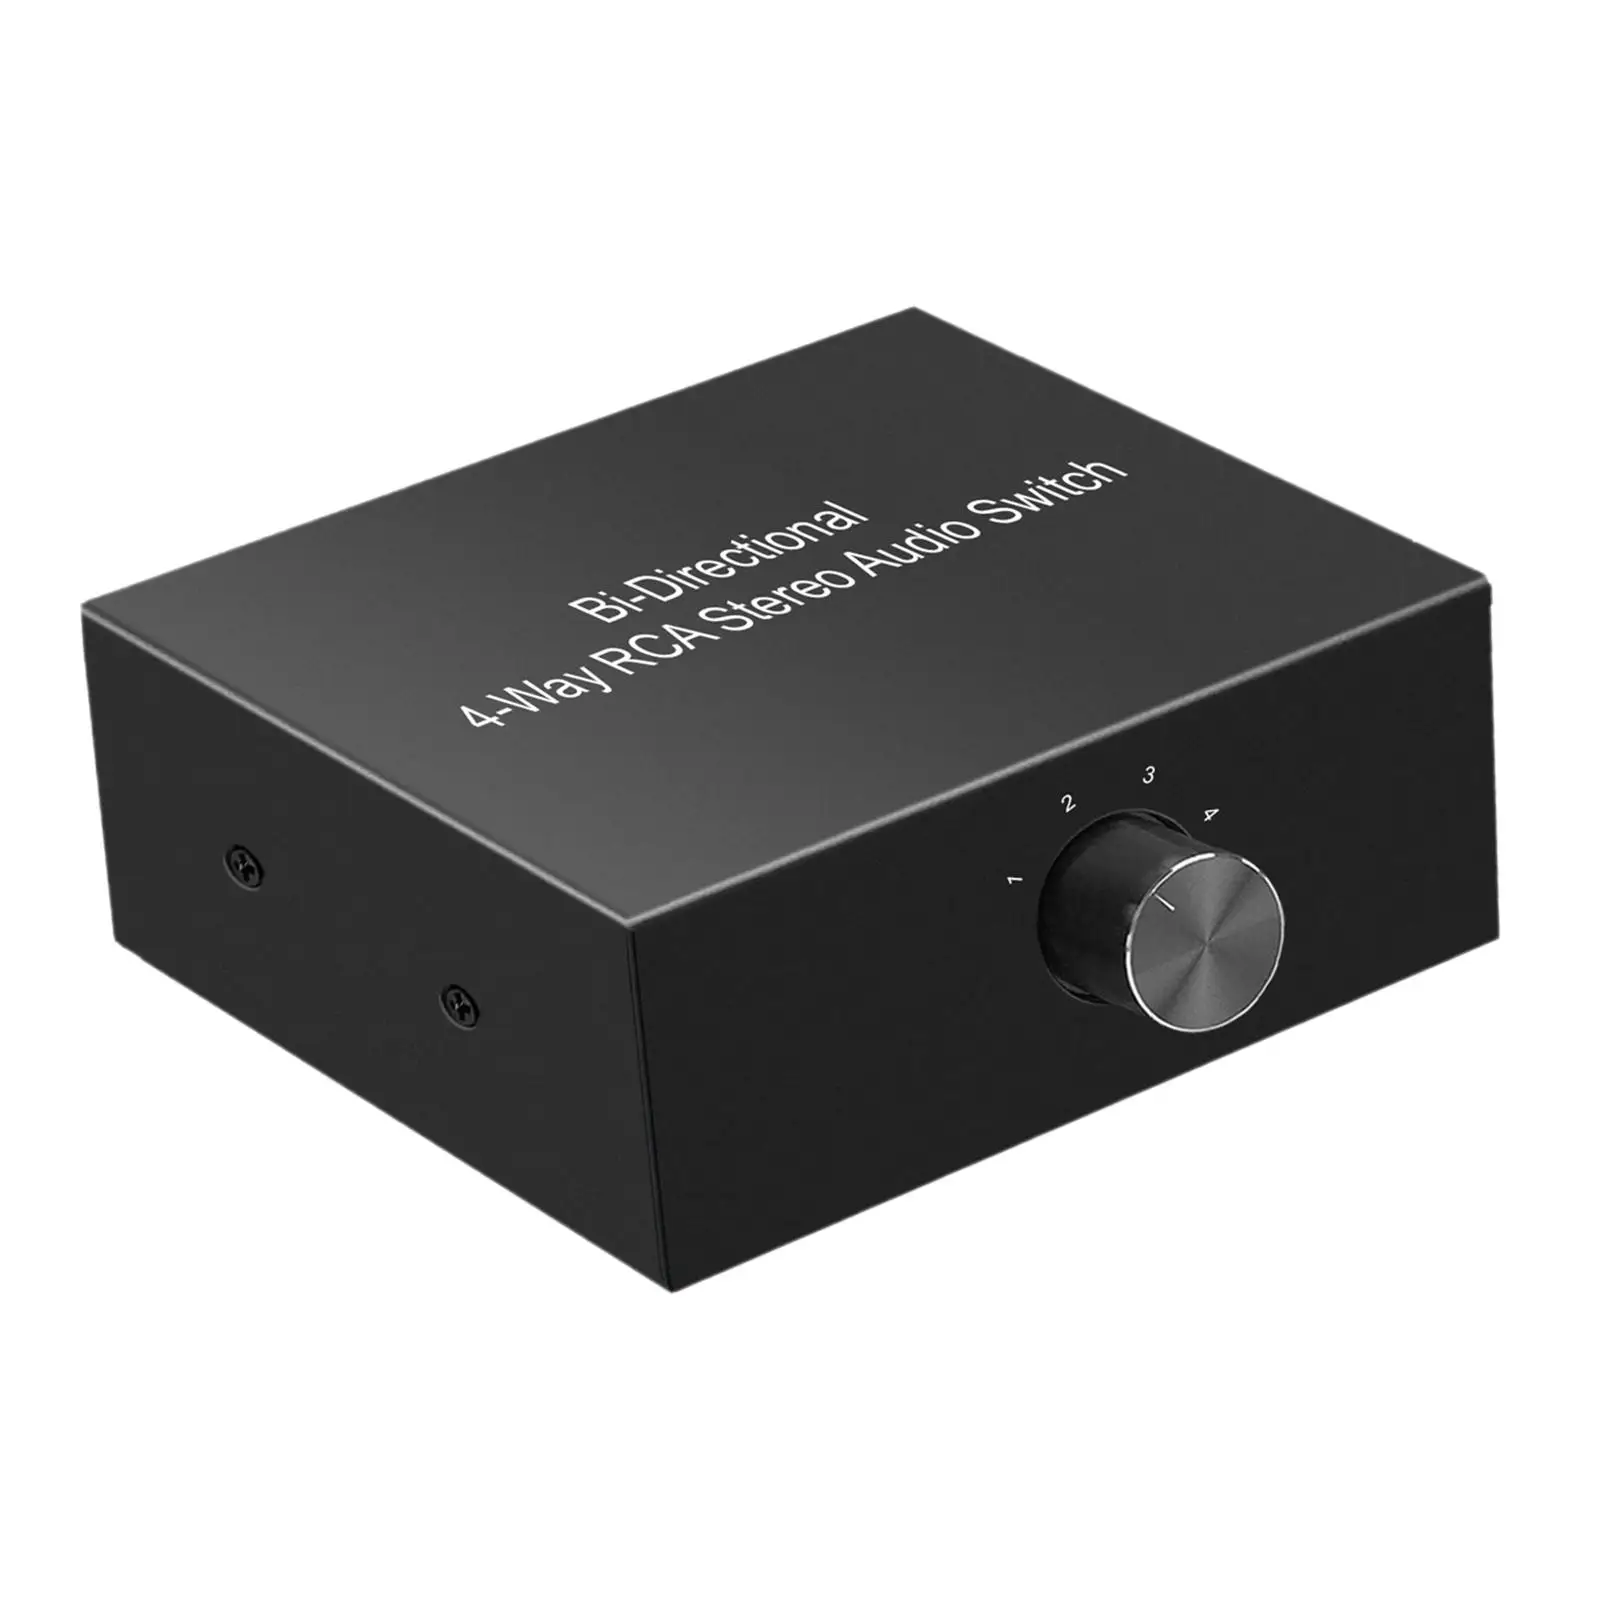 4 Ports Bi-directional R L RCA Audio Switcher Box Plug and Play Audio Switch Splitter Distributor for Game Console Headphone TV